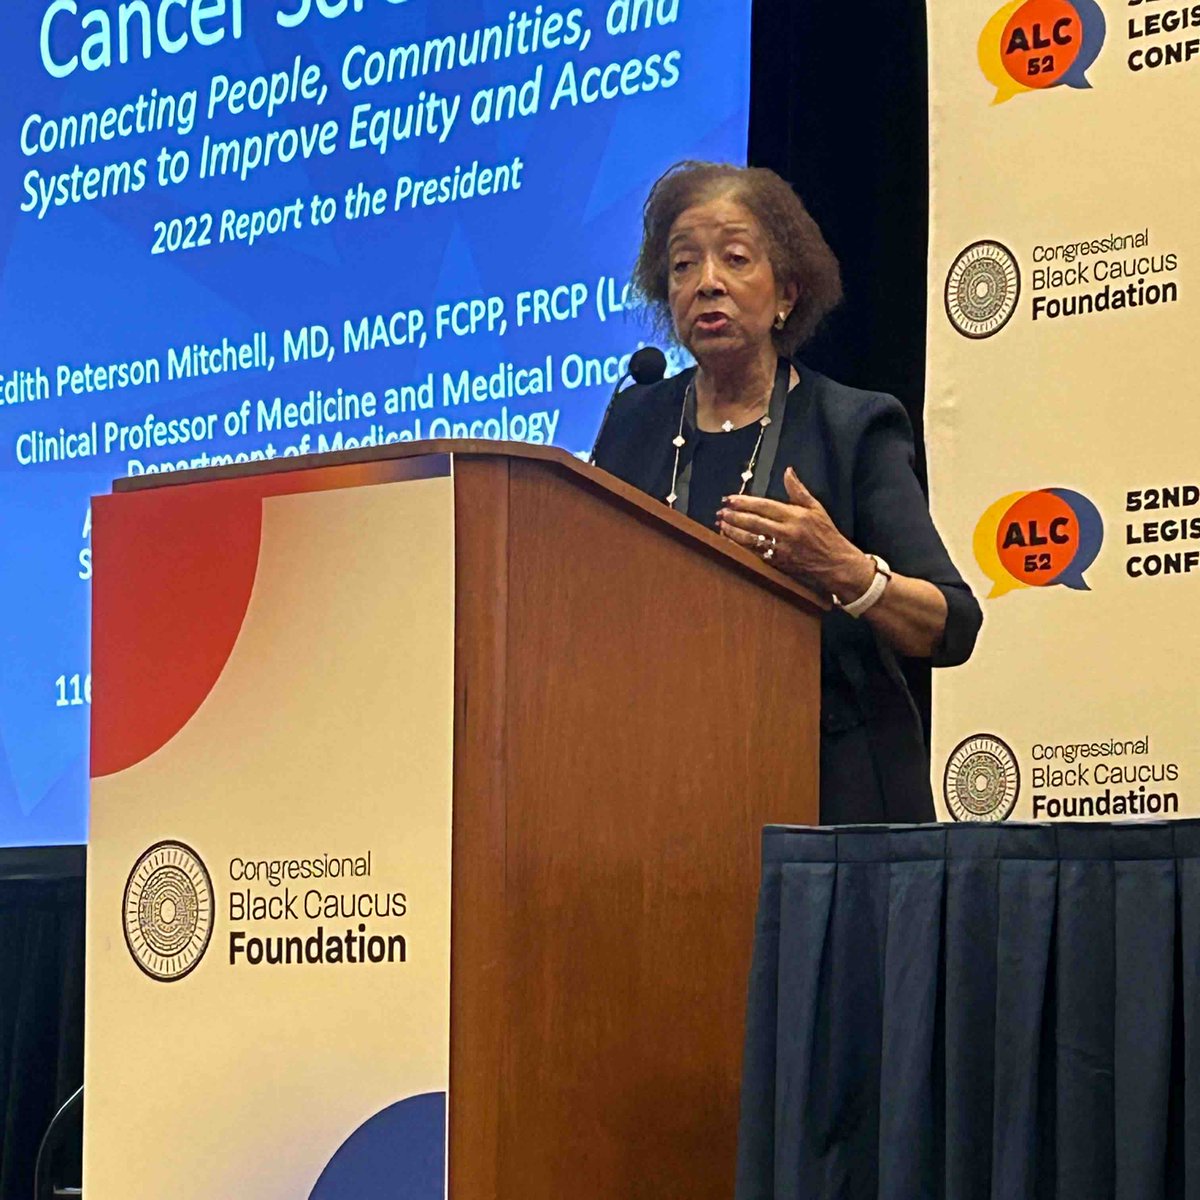 The NMA is excited to welcome to the stage Dr. Edith Peterson Mitchell as she discusses the National Cancer Plan and how the NMA can be involved. #NMAPDS #cancer #health #equity #access #washingtondc #CBC